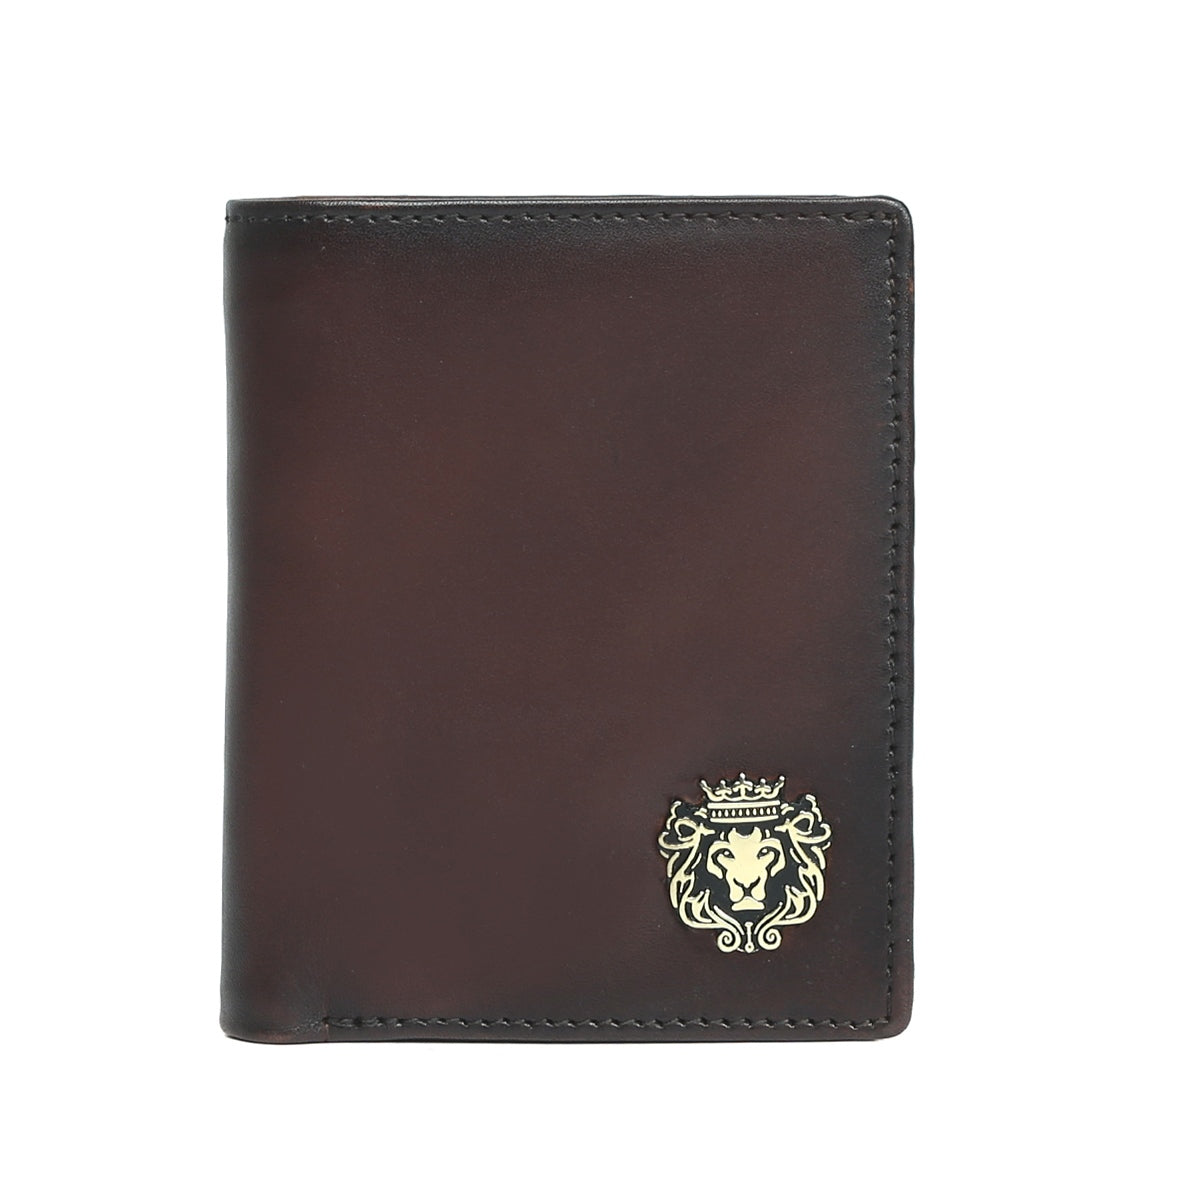 Brown Leather Two Fold Wallet With Coin Pocket & Multiple card Slots By Brune & Bareskin